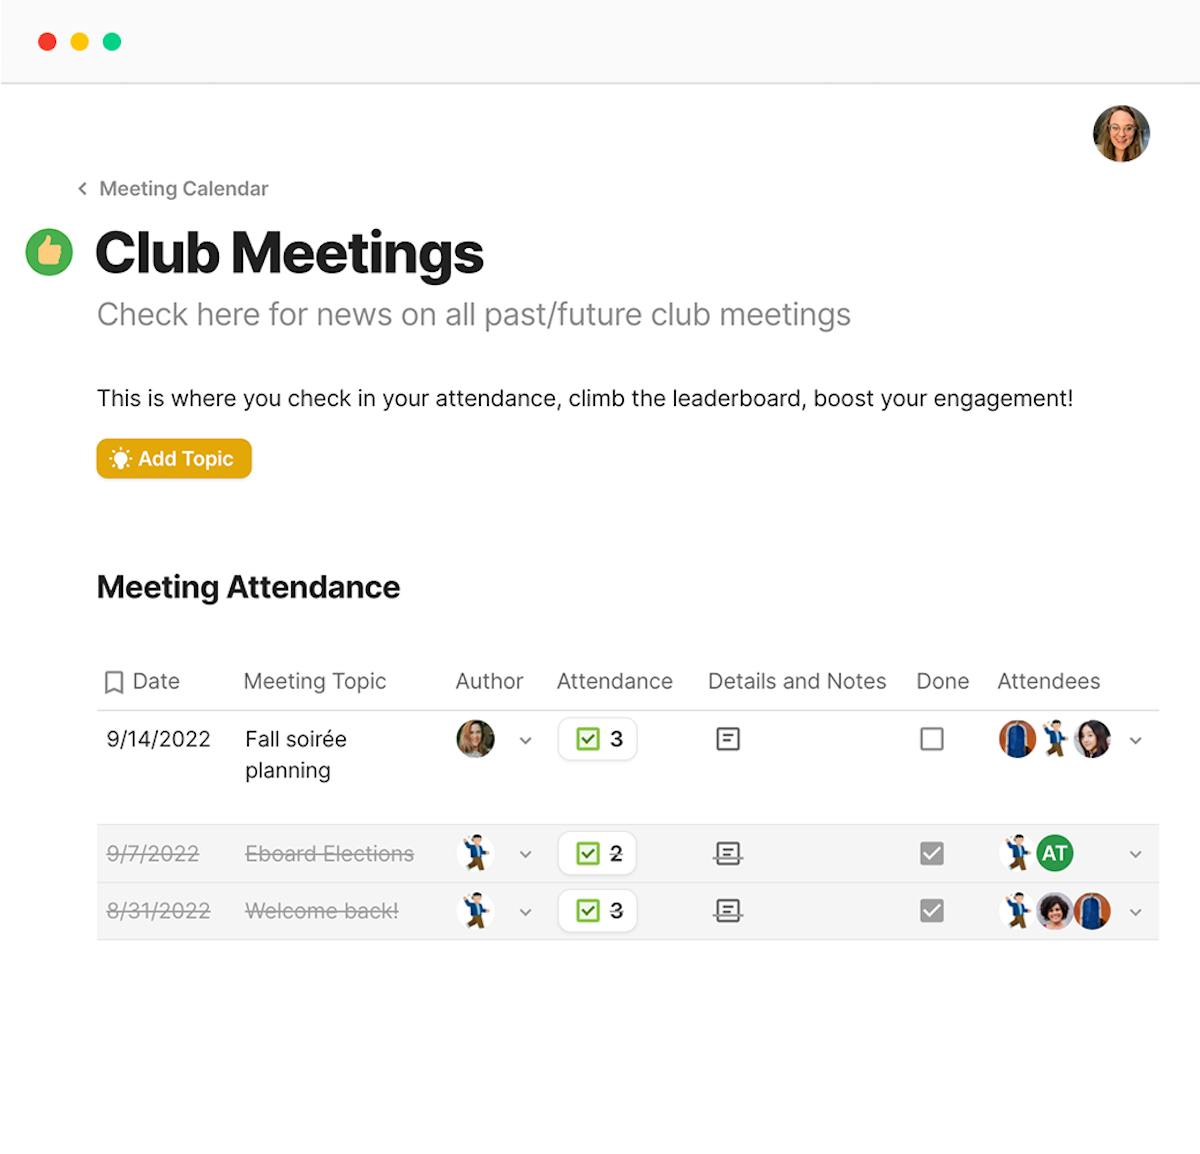 Club meetings list built in Coda - shows meeting topic, attendance, notes, and attendees.